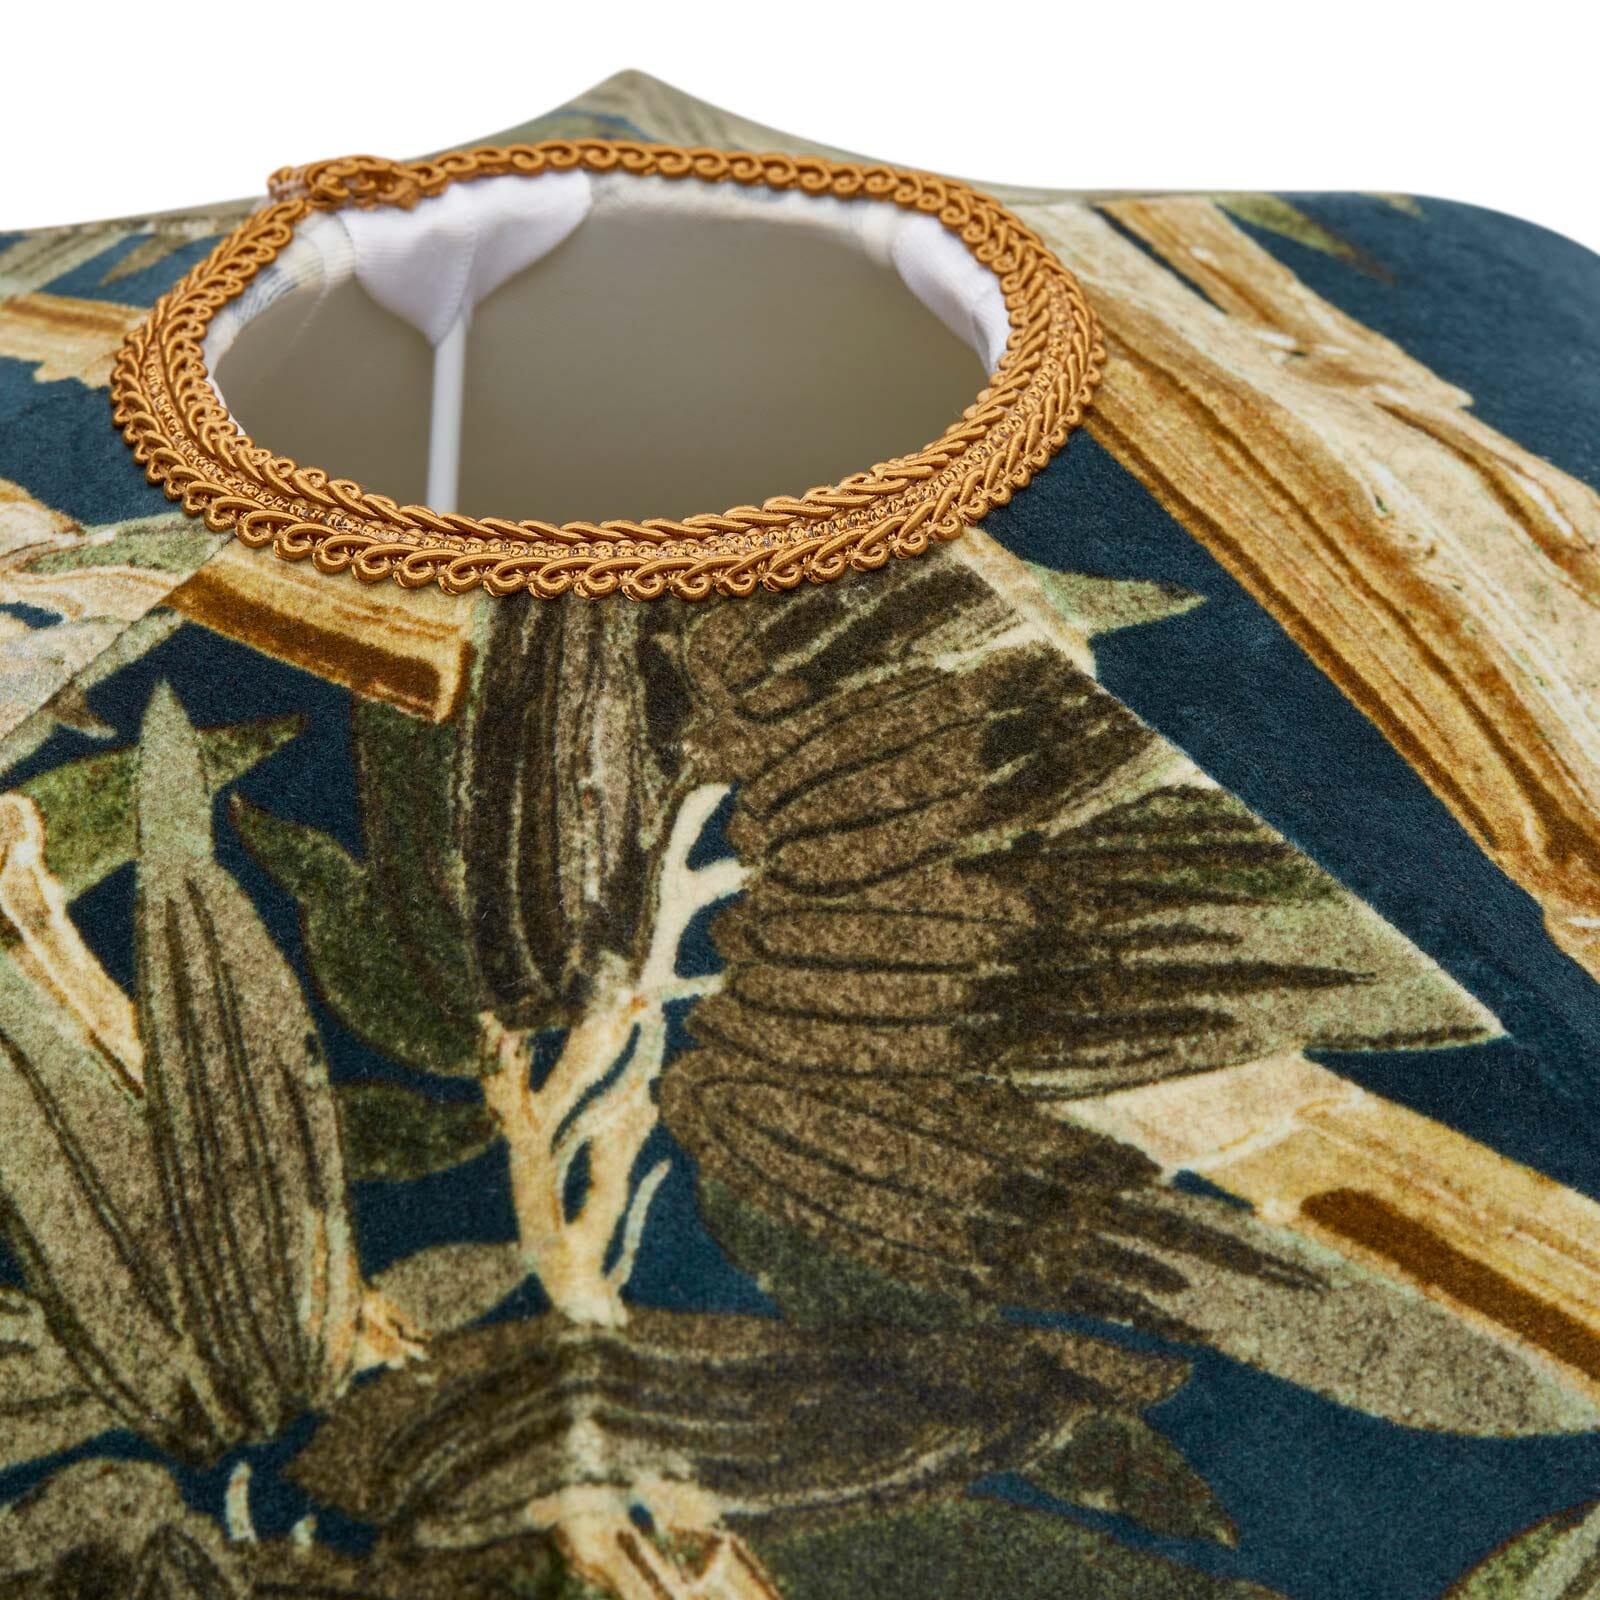 House of Hackney's traditional-style Tilia lampshades are meticulously handcrafted in Wales. This British velvet design features the botanical BAMBUSA print against a moody midnight background. Gold-toned fringed trims lend a luxurious finish.